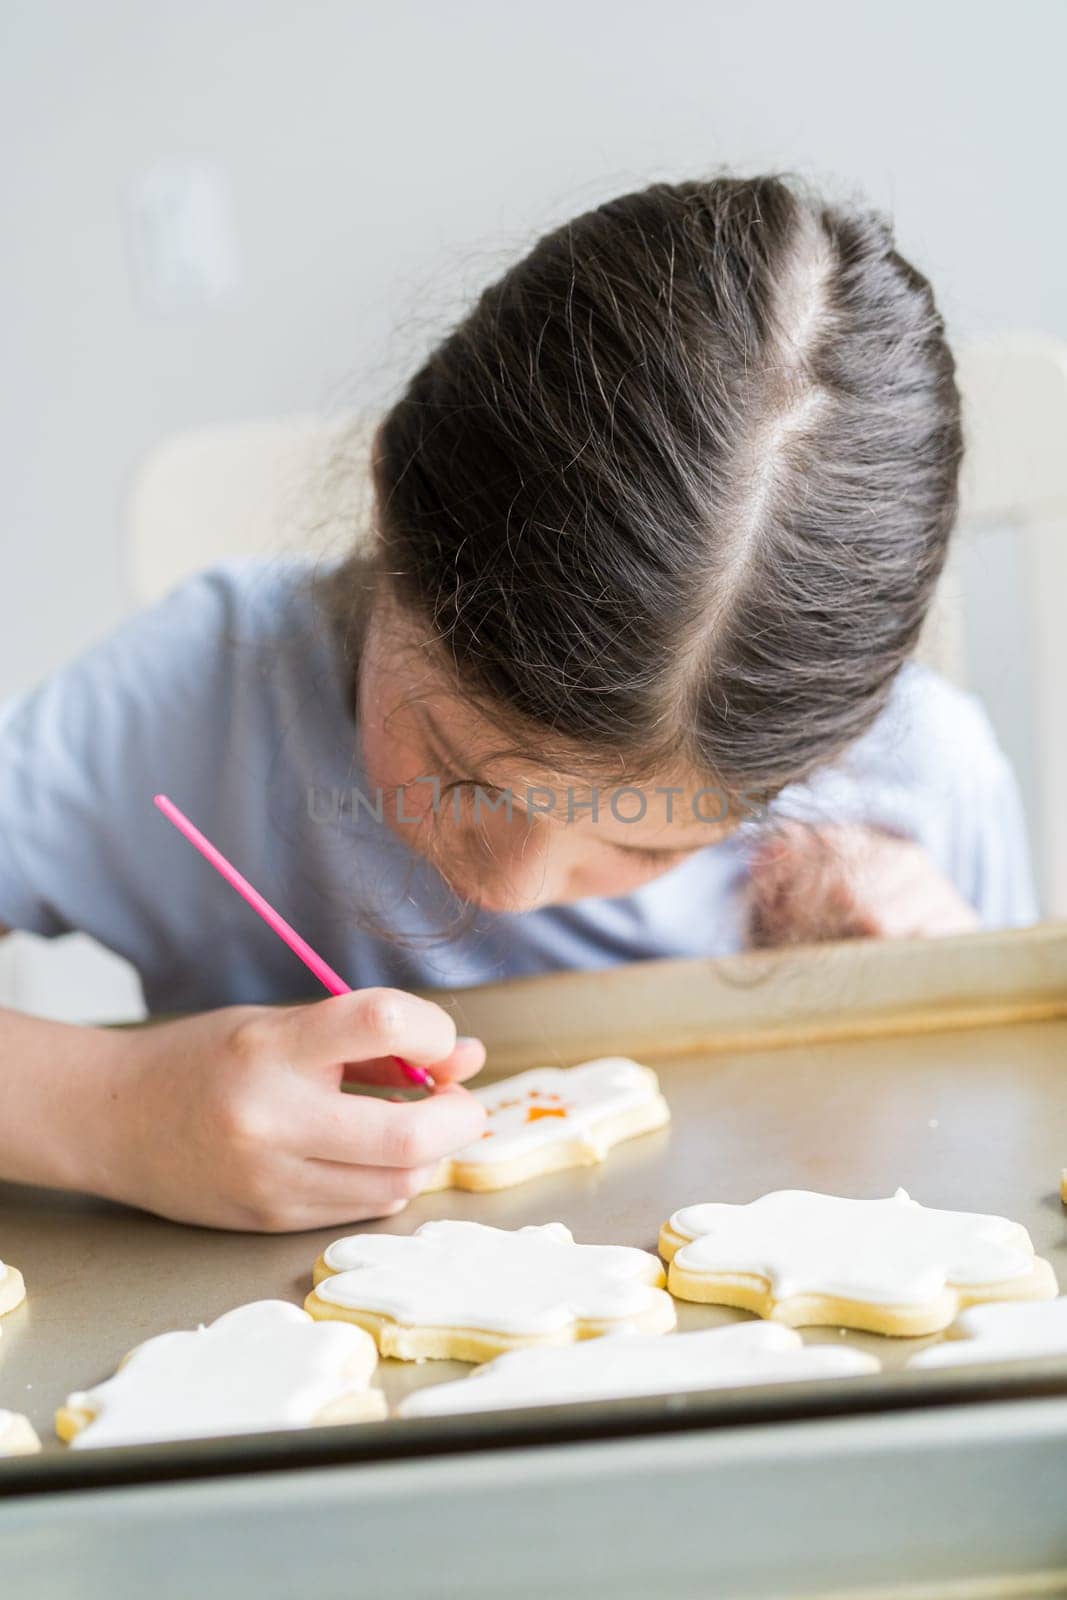 A heartwarming scene of a little girl carefully writing 'Sorry' on sugar cookies with food coloring, the cookies beautifully flooded with white royal icing.